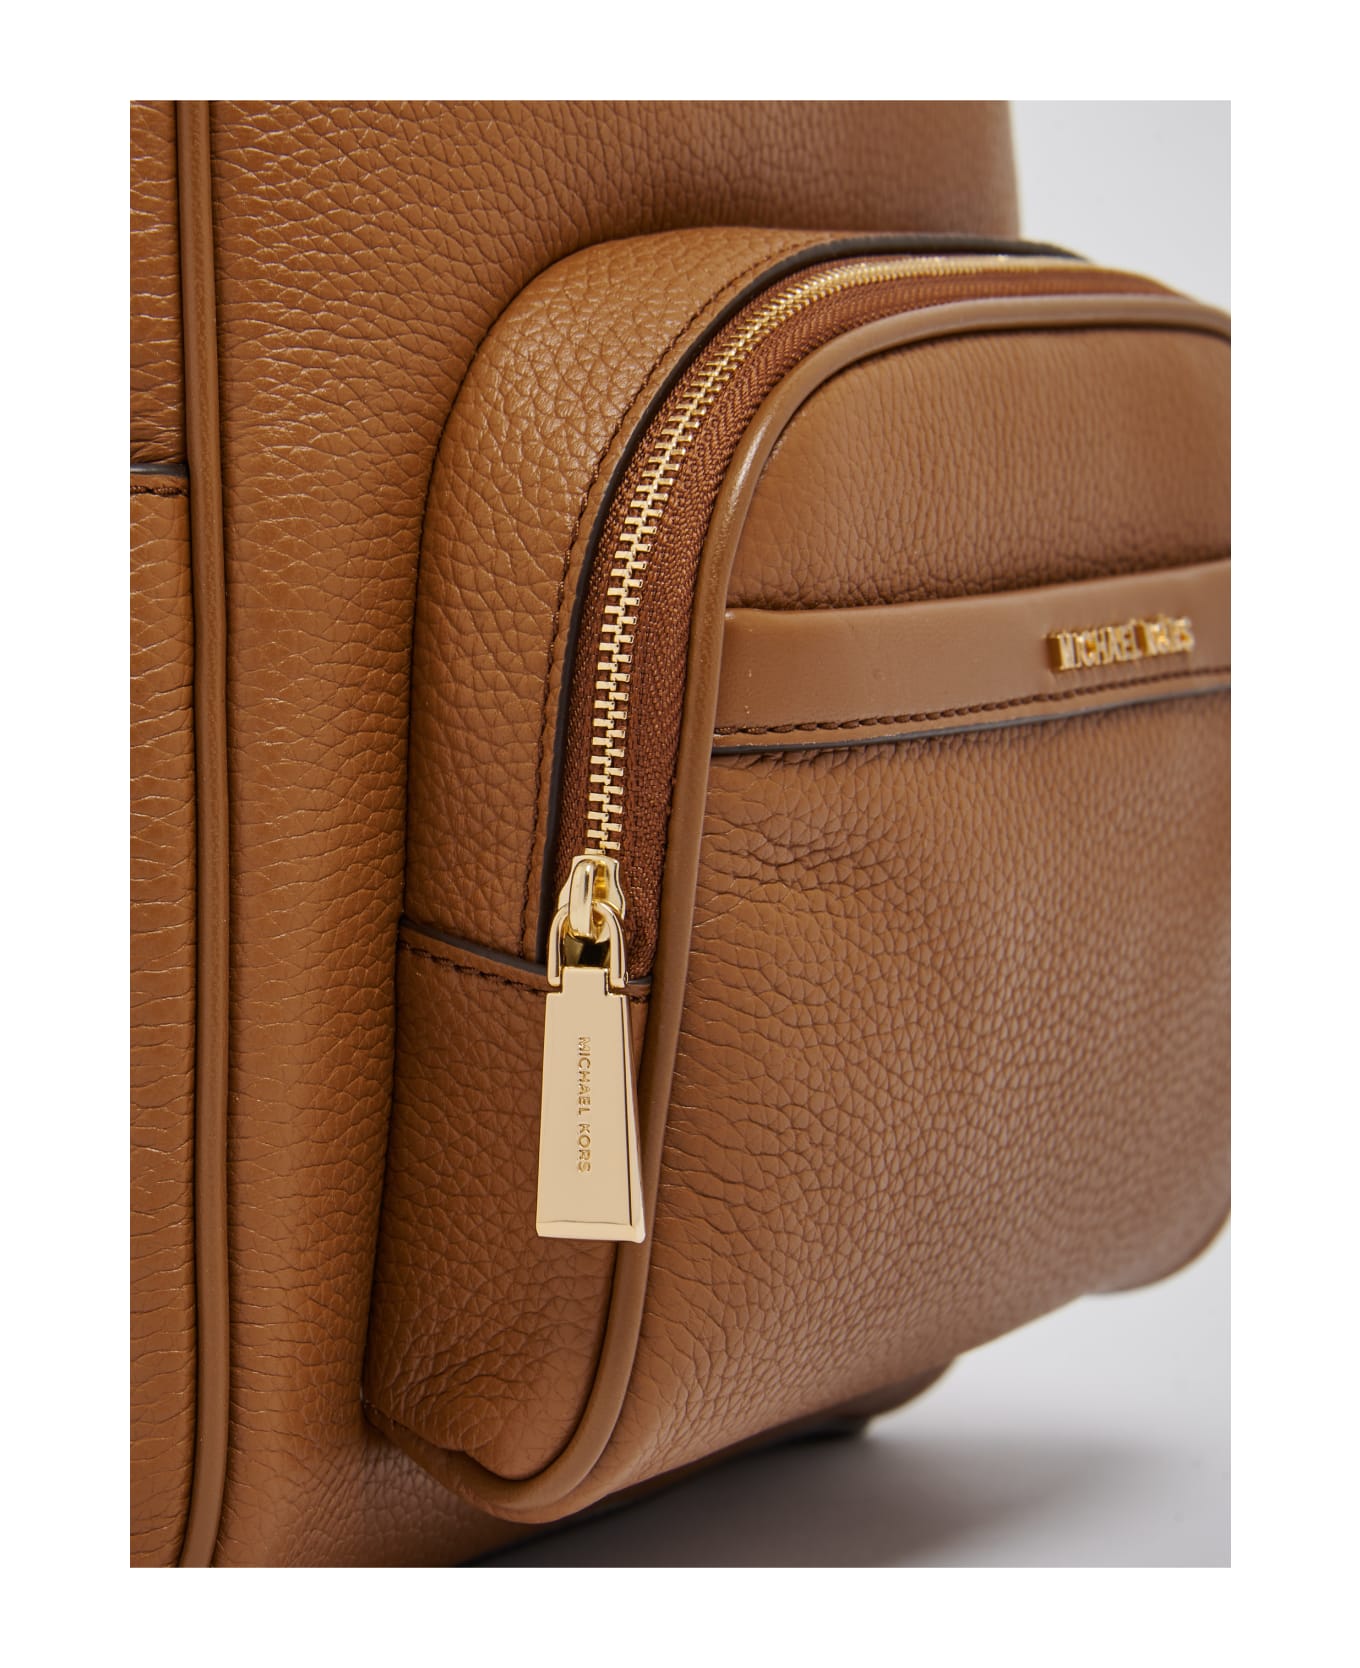 Michael Kors Brown Leather Backpack - CUOIO バックパック